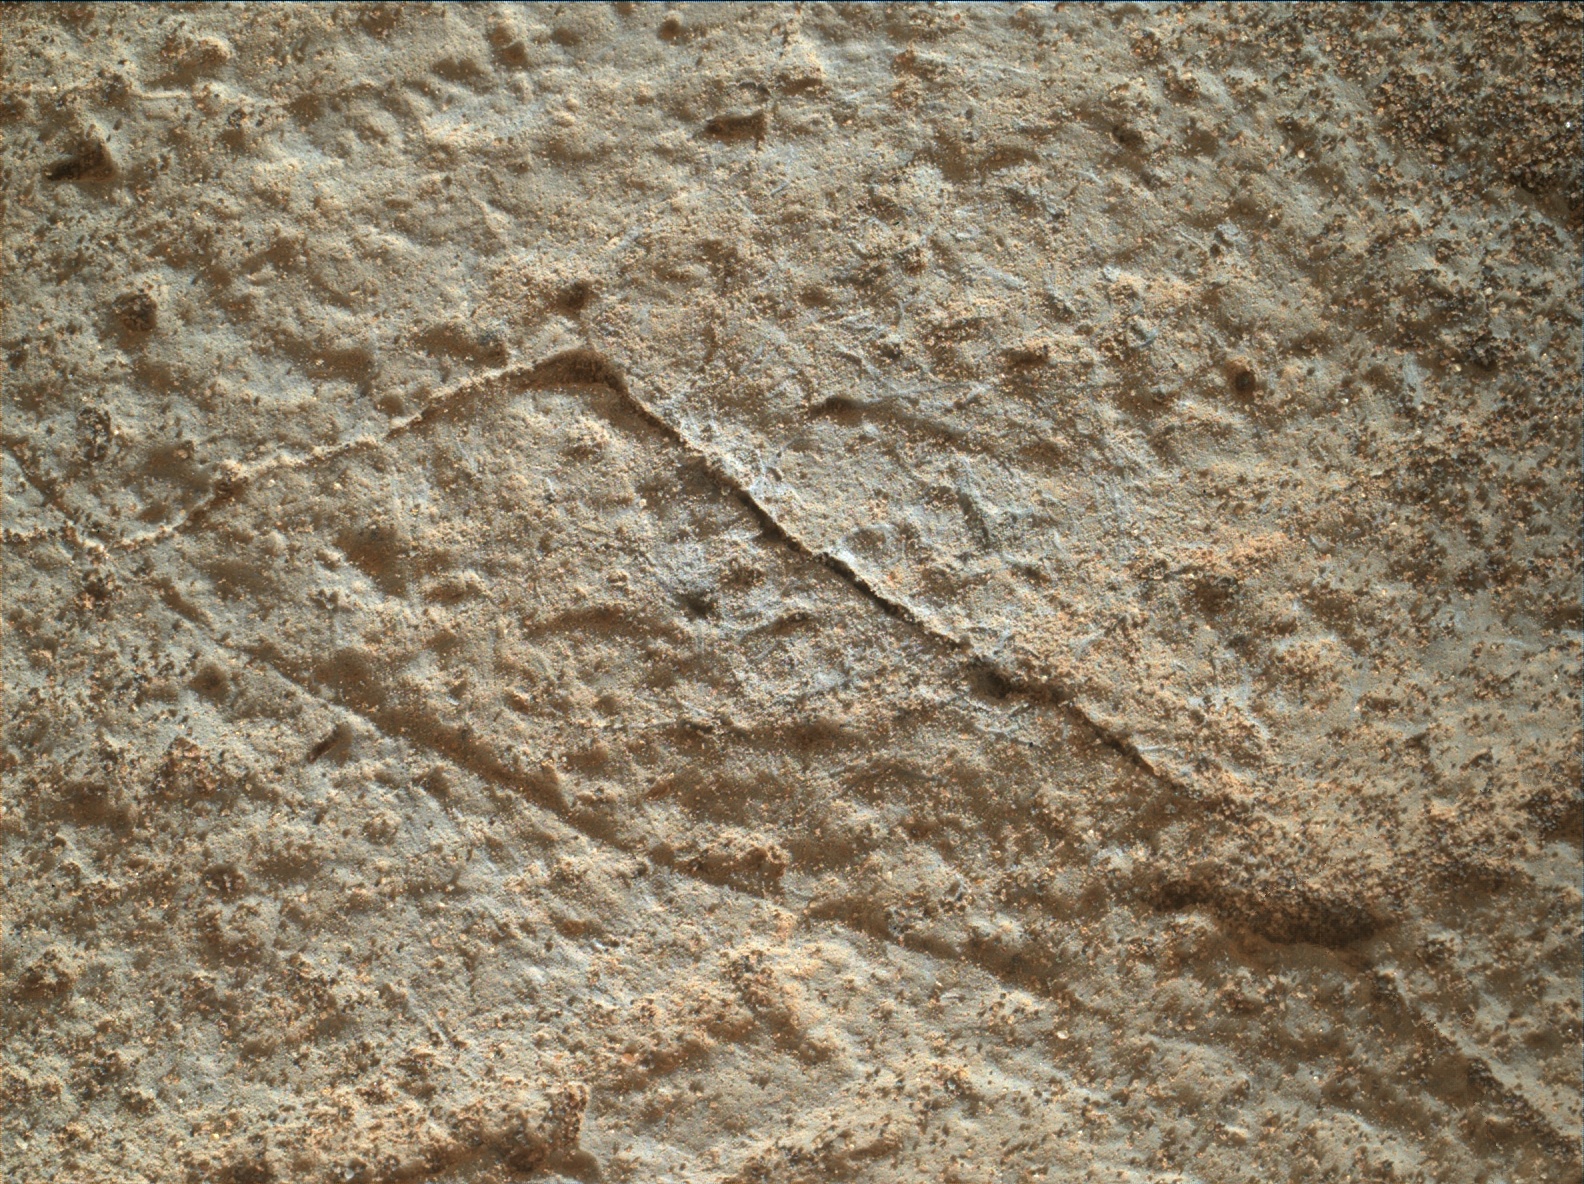 Nasa's Mars rover Curiosity acquired this image using its Mars Hand Lens Imager (MAHLI) on Sol 831